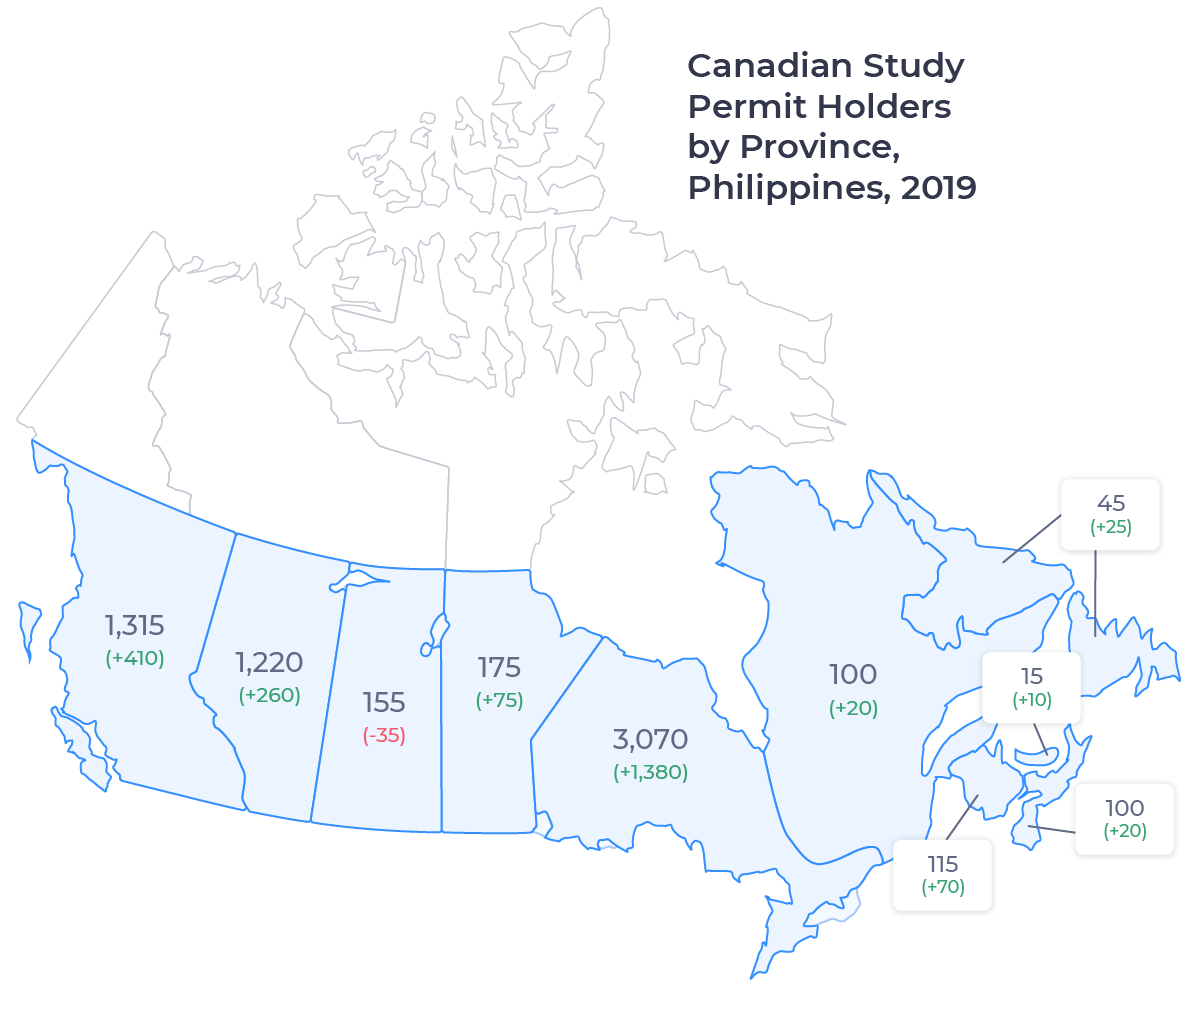 Map of Canada showing the number of study permit holders from the Philippines in each province. Described in detail below.